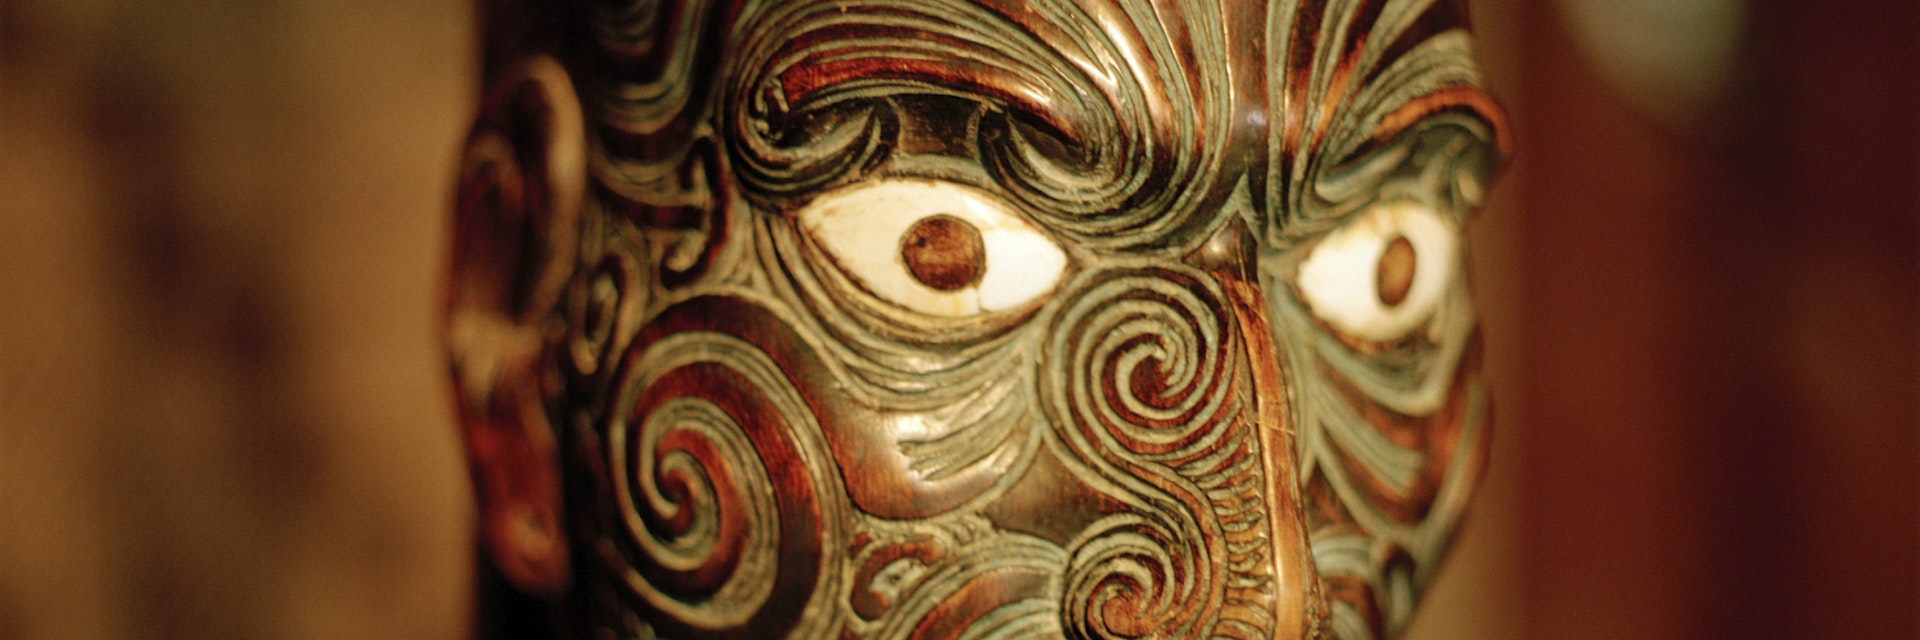 Carved figure on main pole at marae meeting house, Maori and Colonial Museum, Okains Bay, Banks Peninsula, South Island, New Zealand